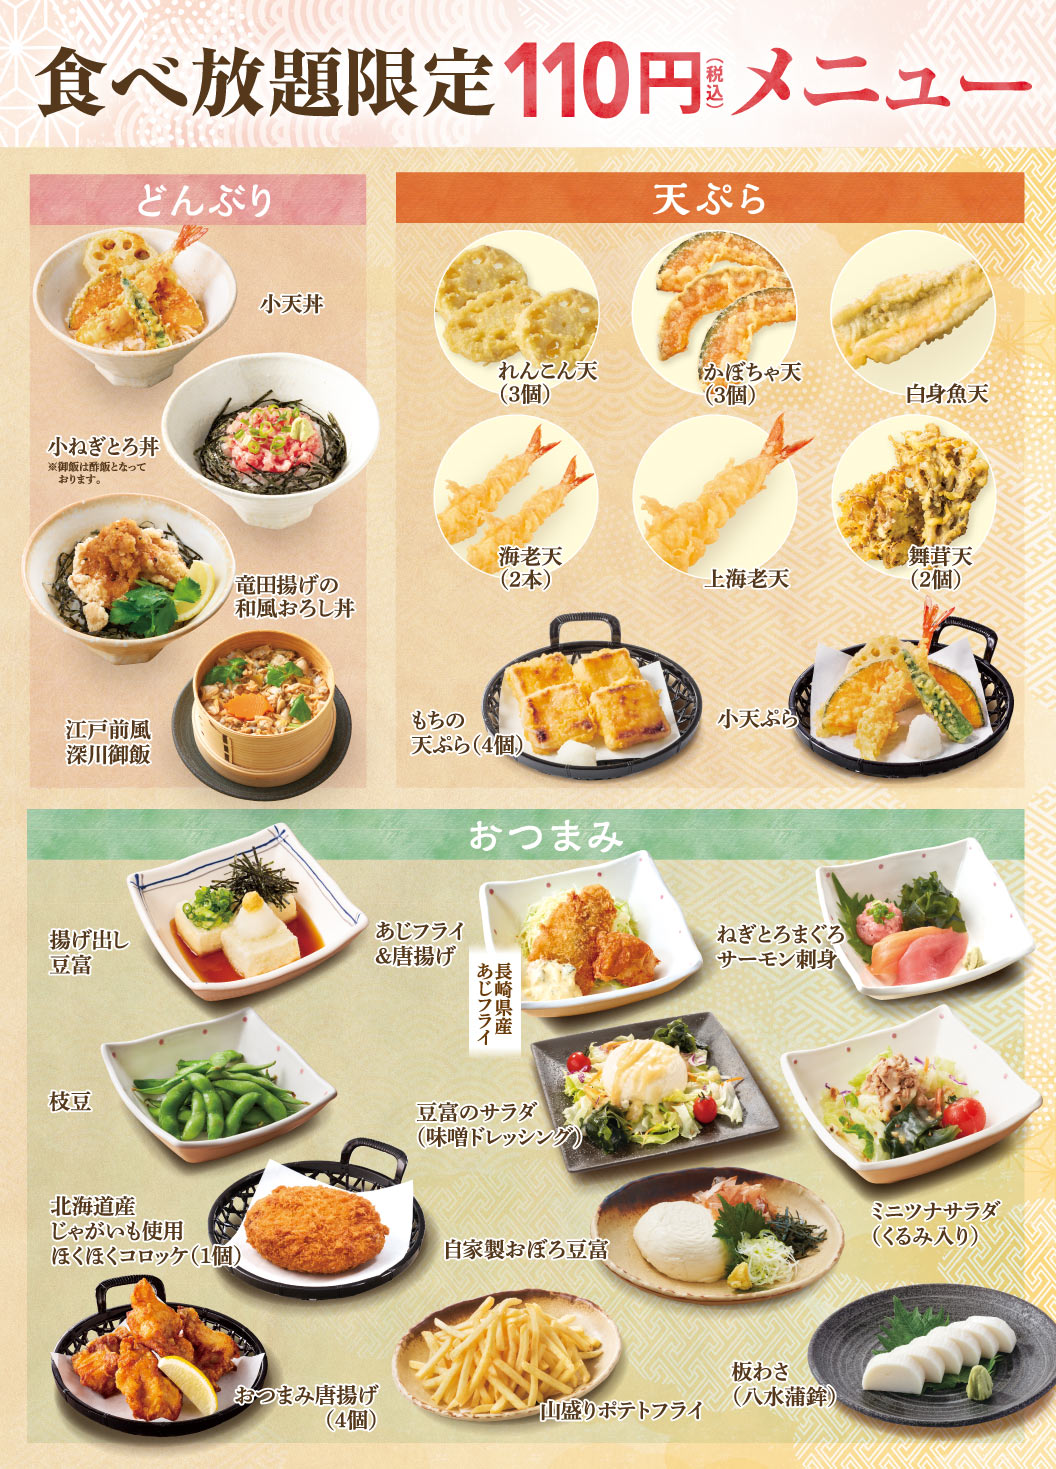 All-All-you-can-eat limited to 110 yen (excluding tax)